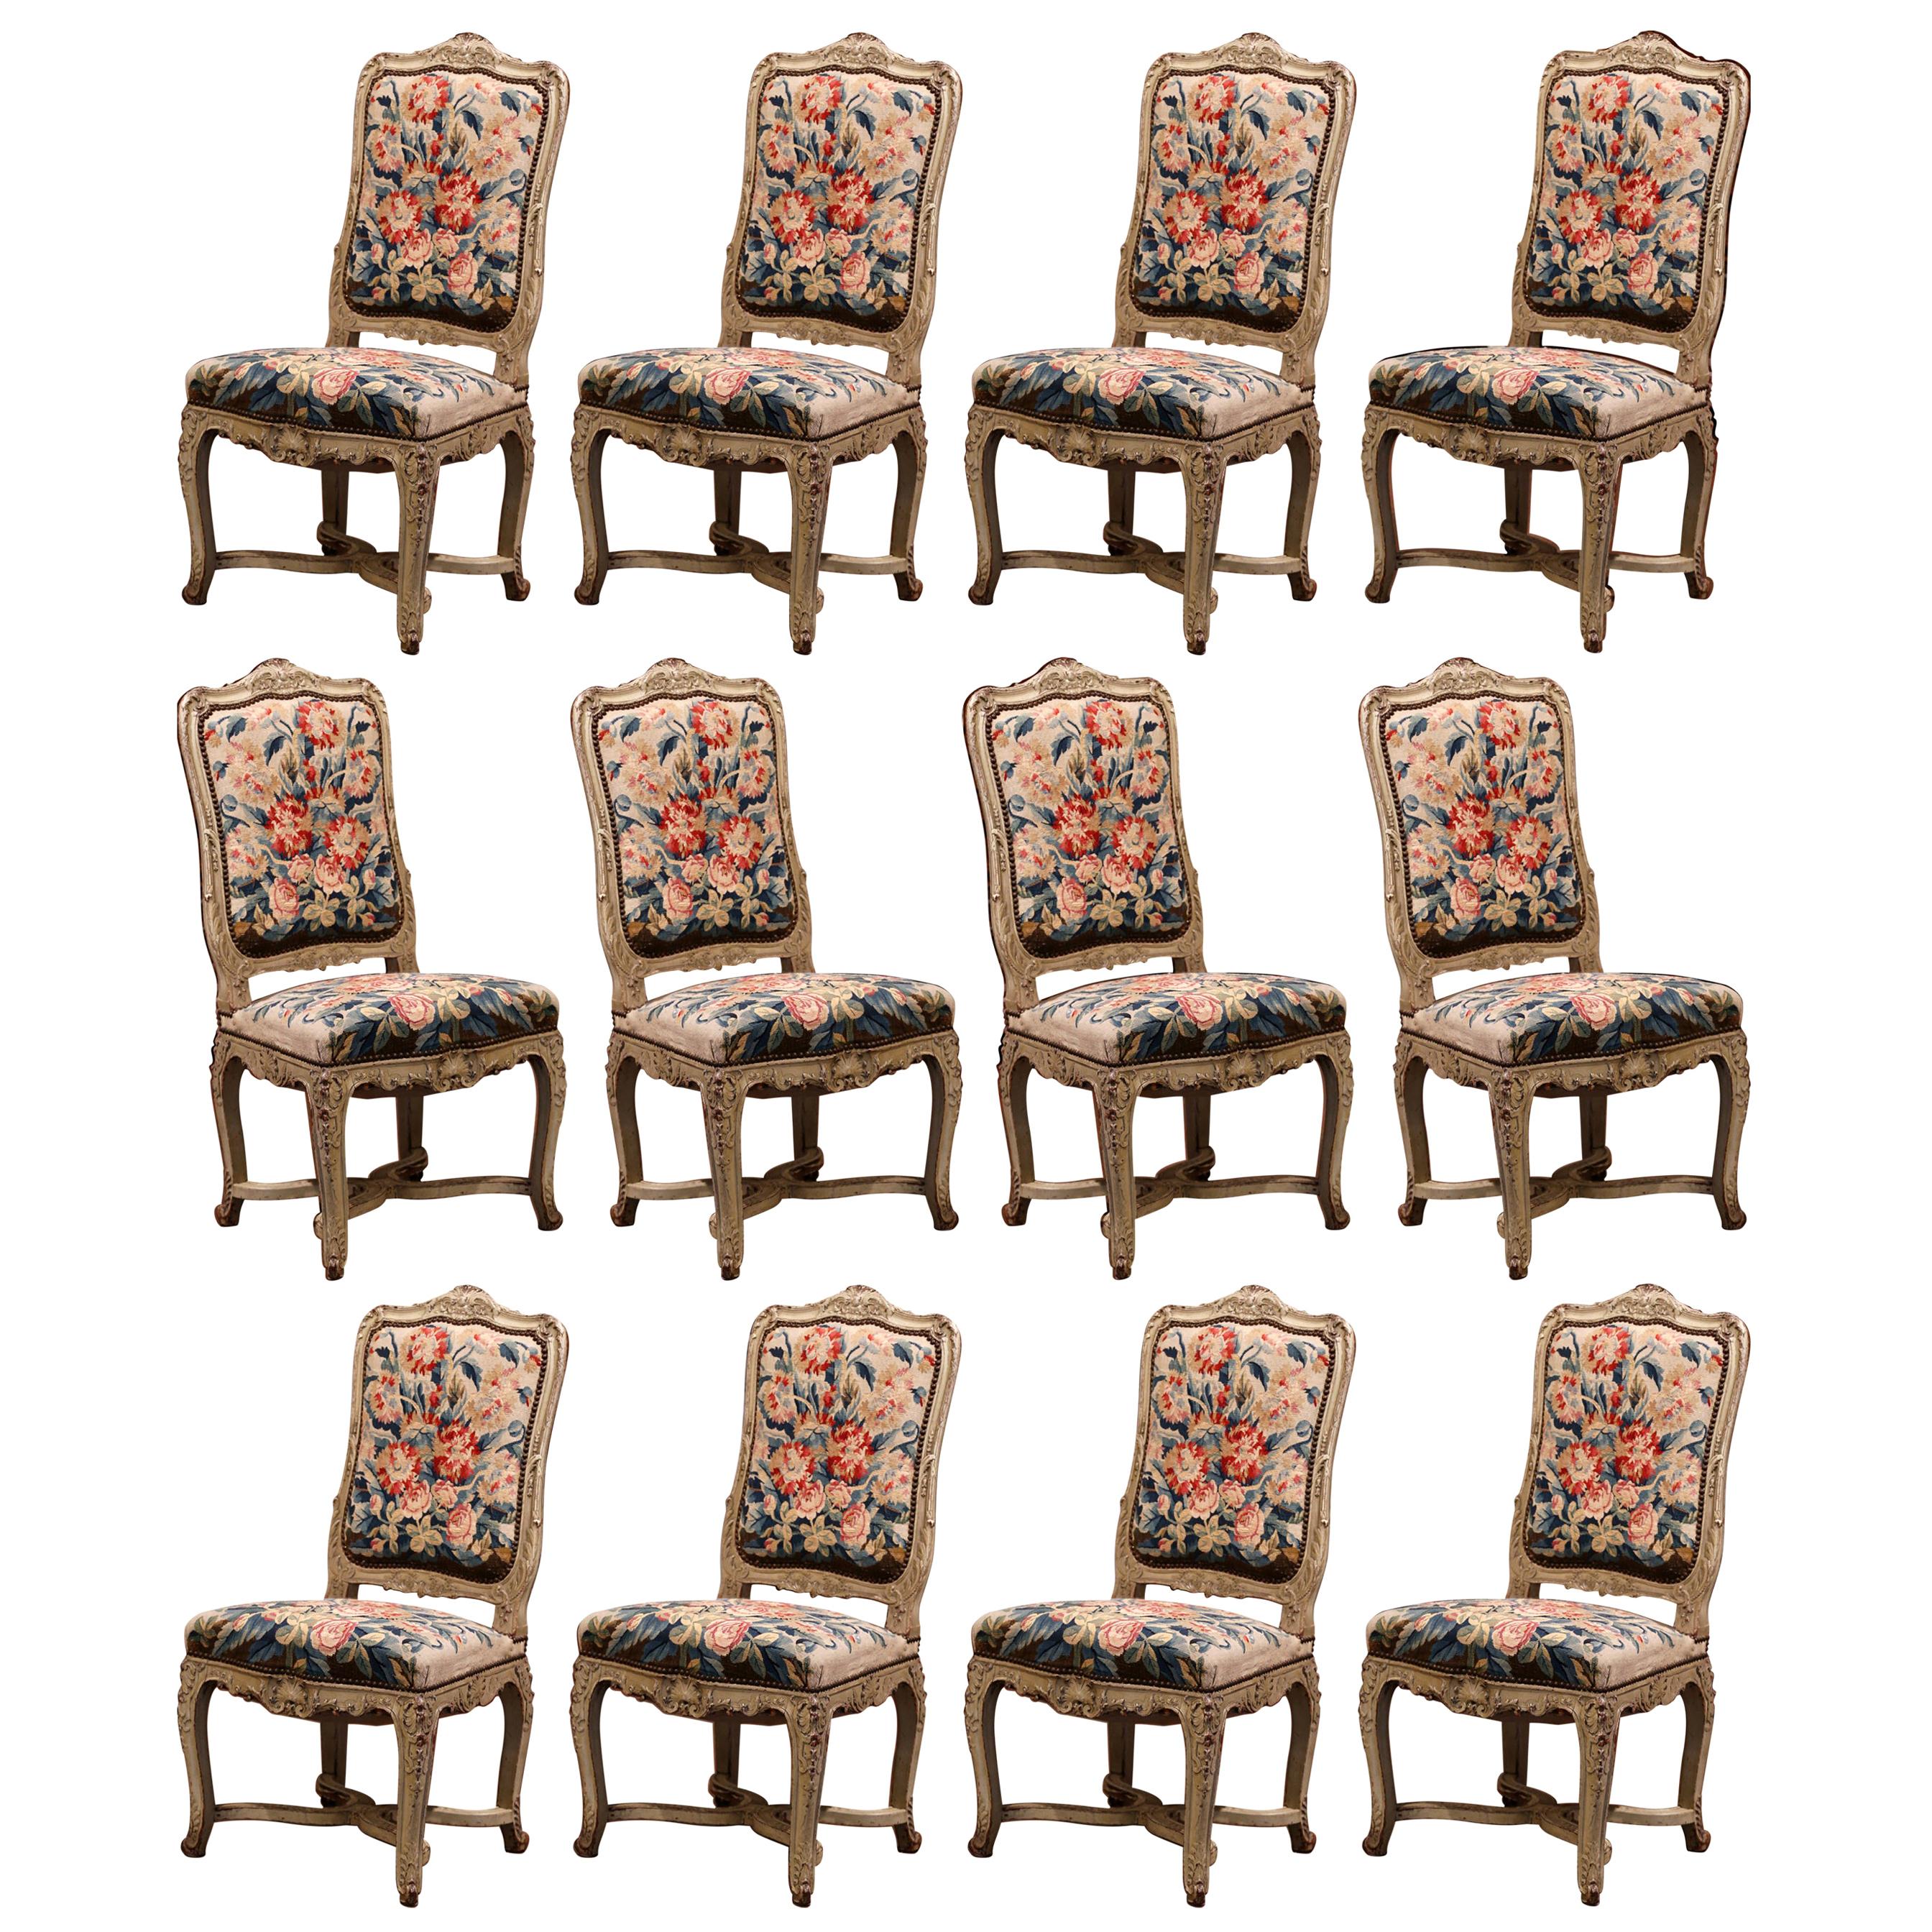 19th Century Carved Painted Dining Room Chairs with Aubusson Tapestry -Set of 12